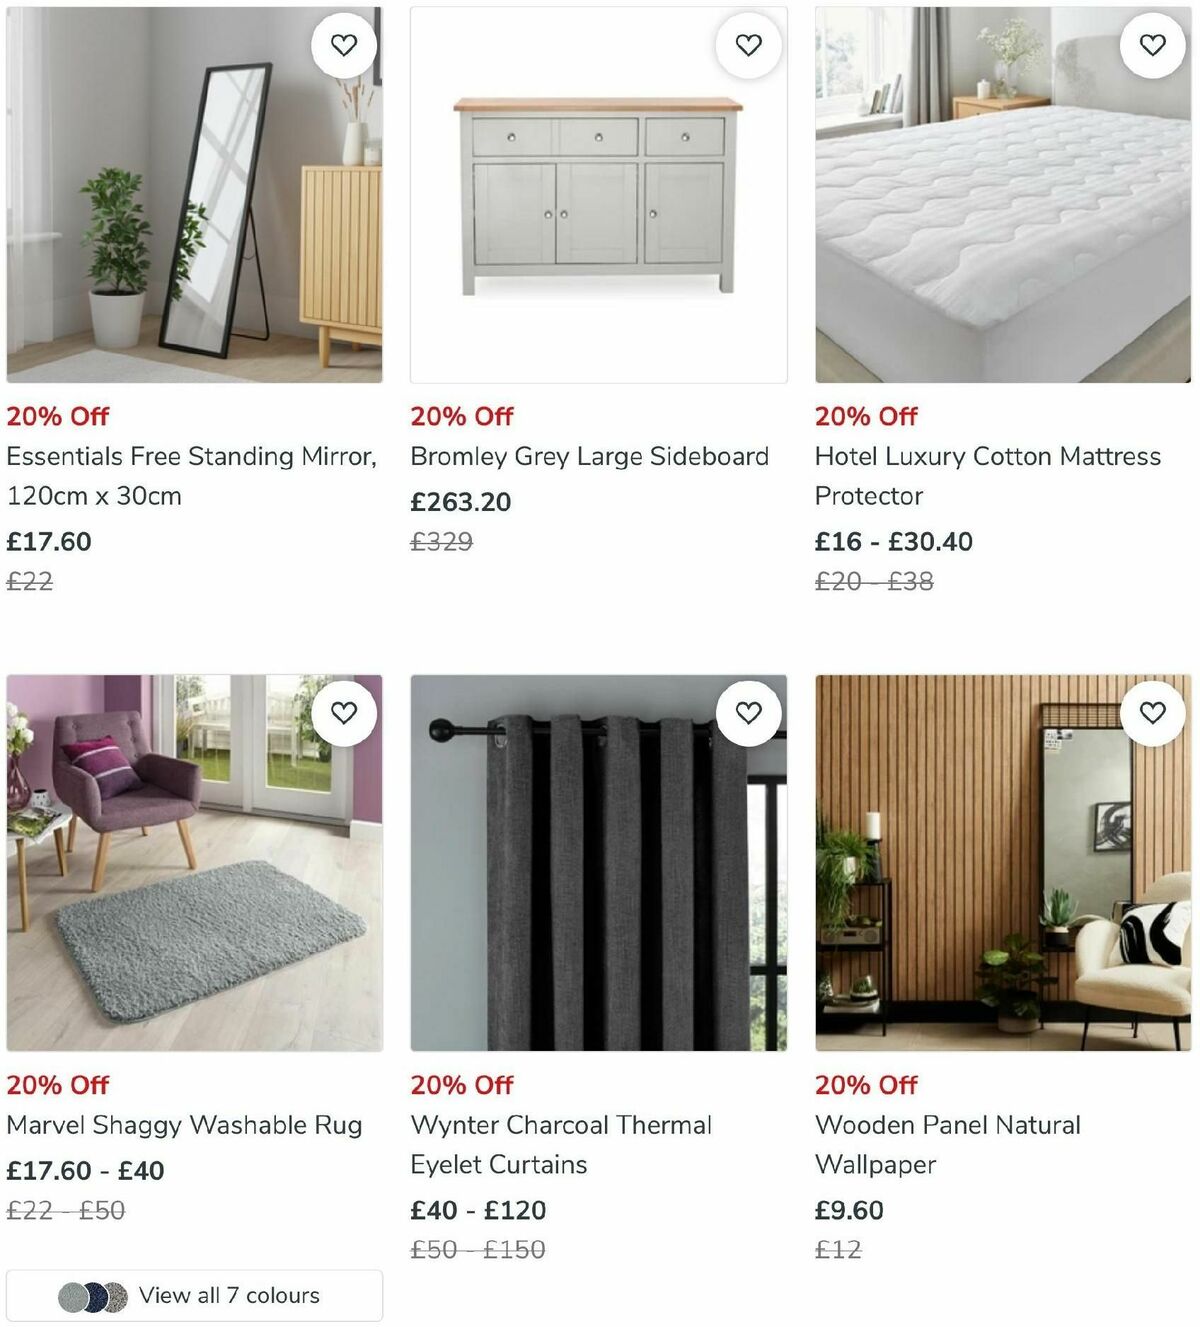 Dunelm Offers from 15 January